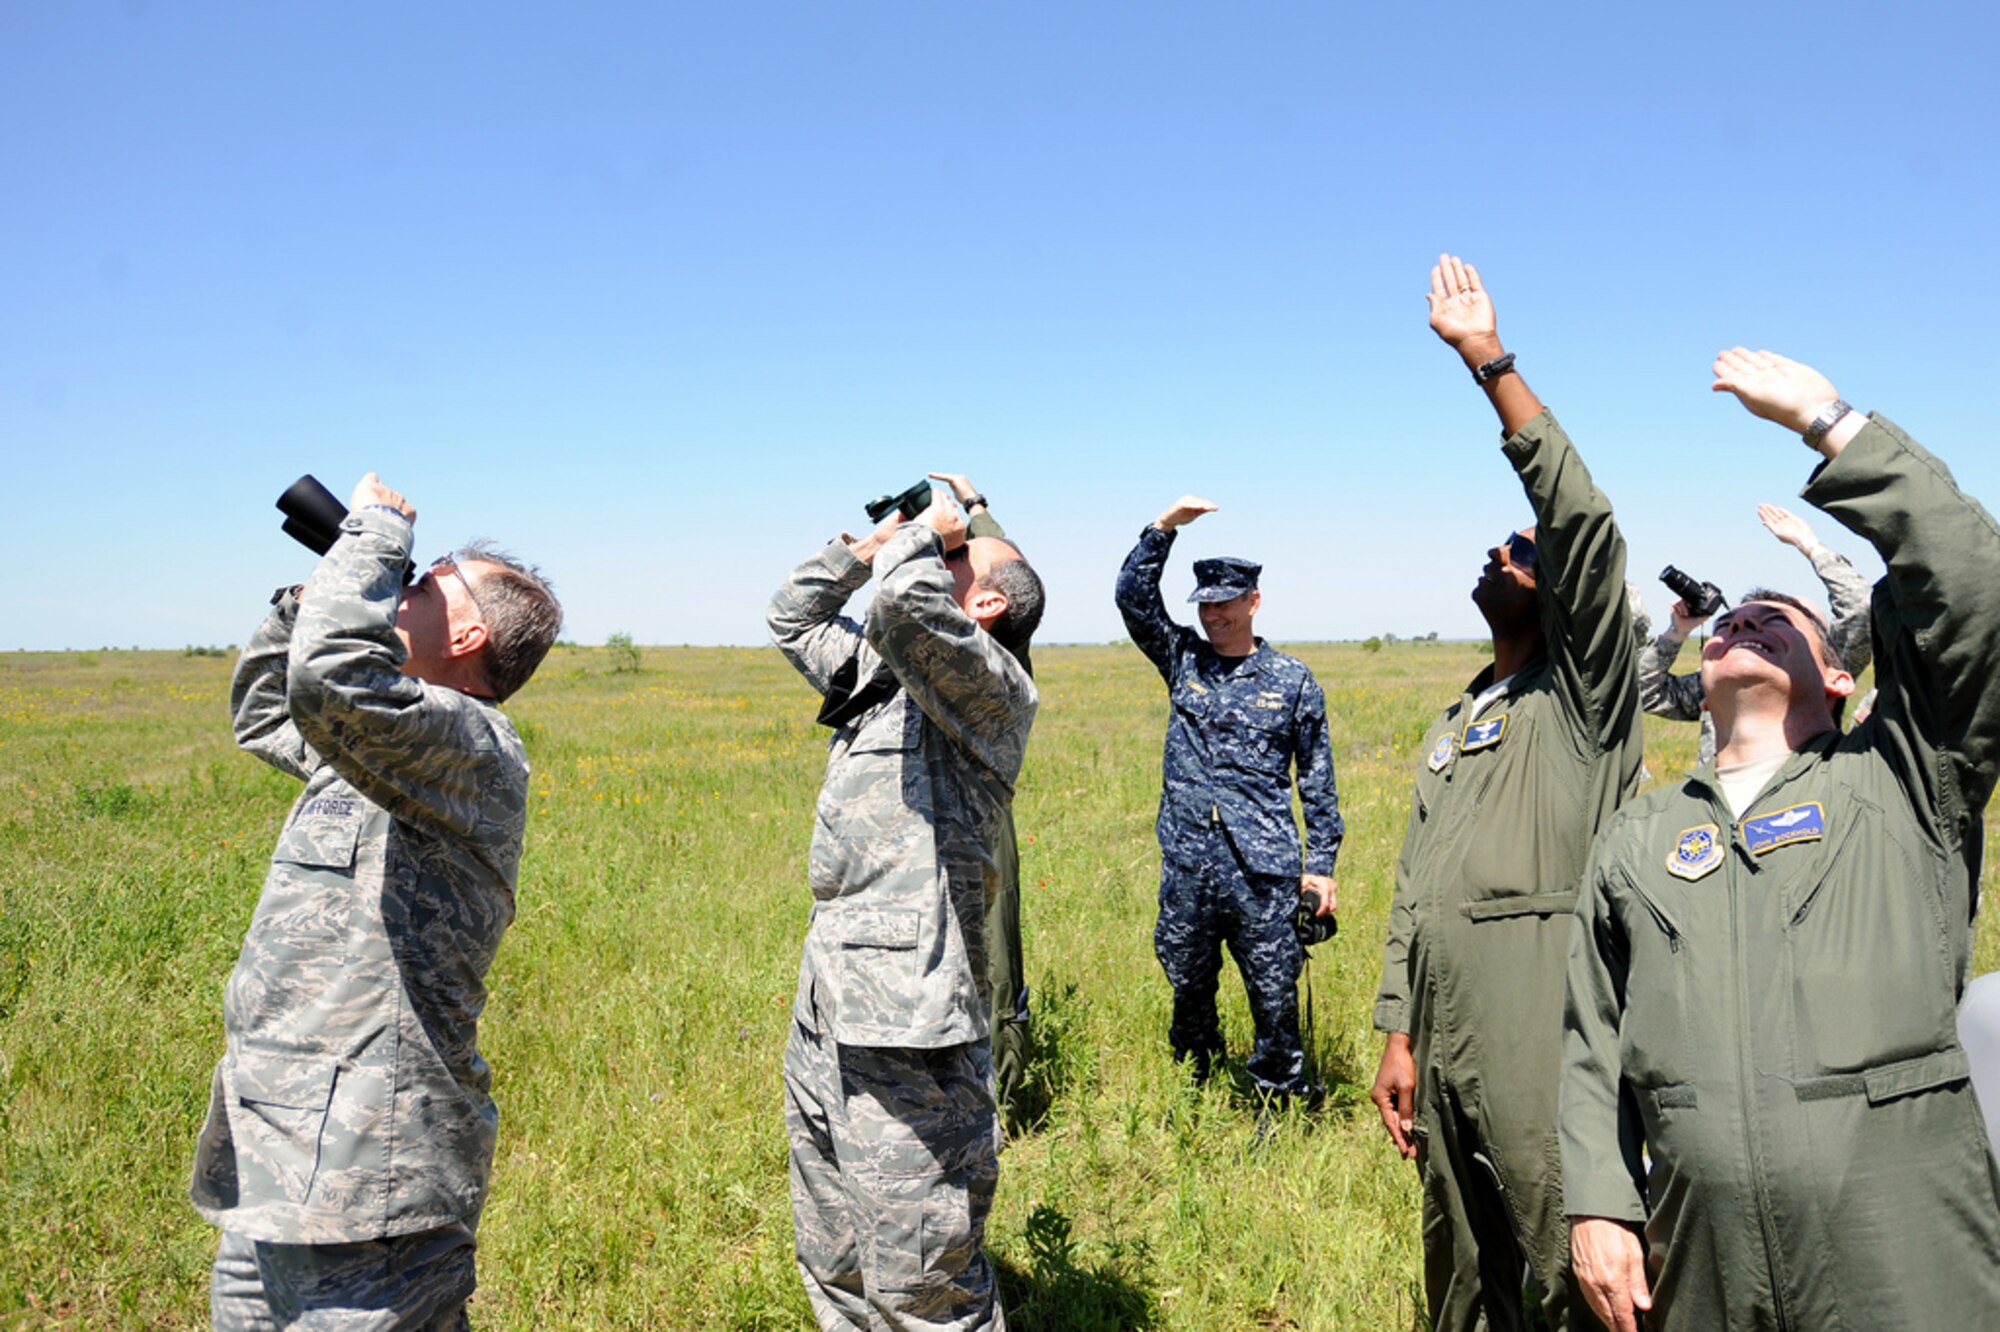 Officials watch as two C-130s release eight Joint Precision Airdrop System (JPADS) bundles during a training exercise Tuesday, April 24, at the Antelope Drop Zone at Fort Hood. The joint exercise was conducted by the Air Force's 317th Airlift Group, responsible for flying the C-130s, and the National Guard's 294th Quartermaster Company, responsible for packing, rigging and loading the bundles onto the aircraft. (Photo by Daniel Cernero, III Corps and Fort Hood Public Affairs)